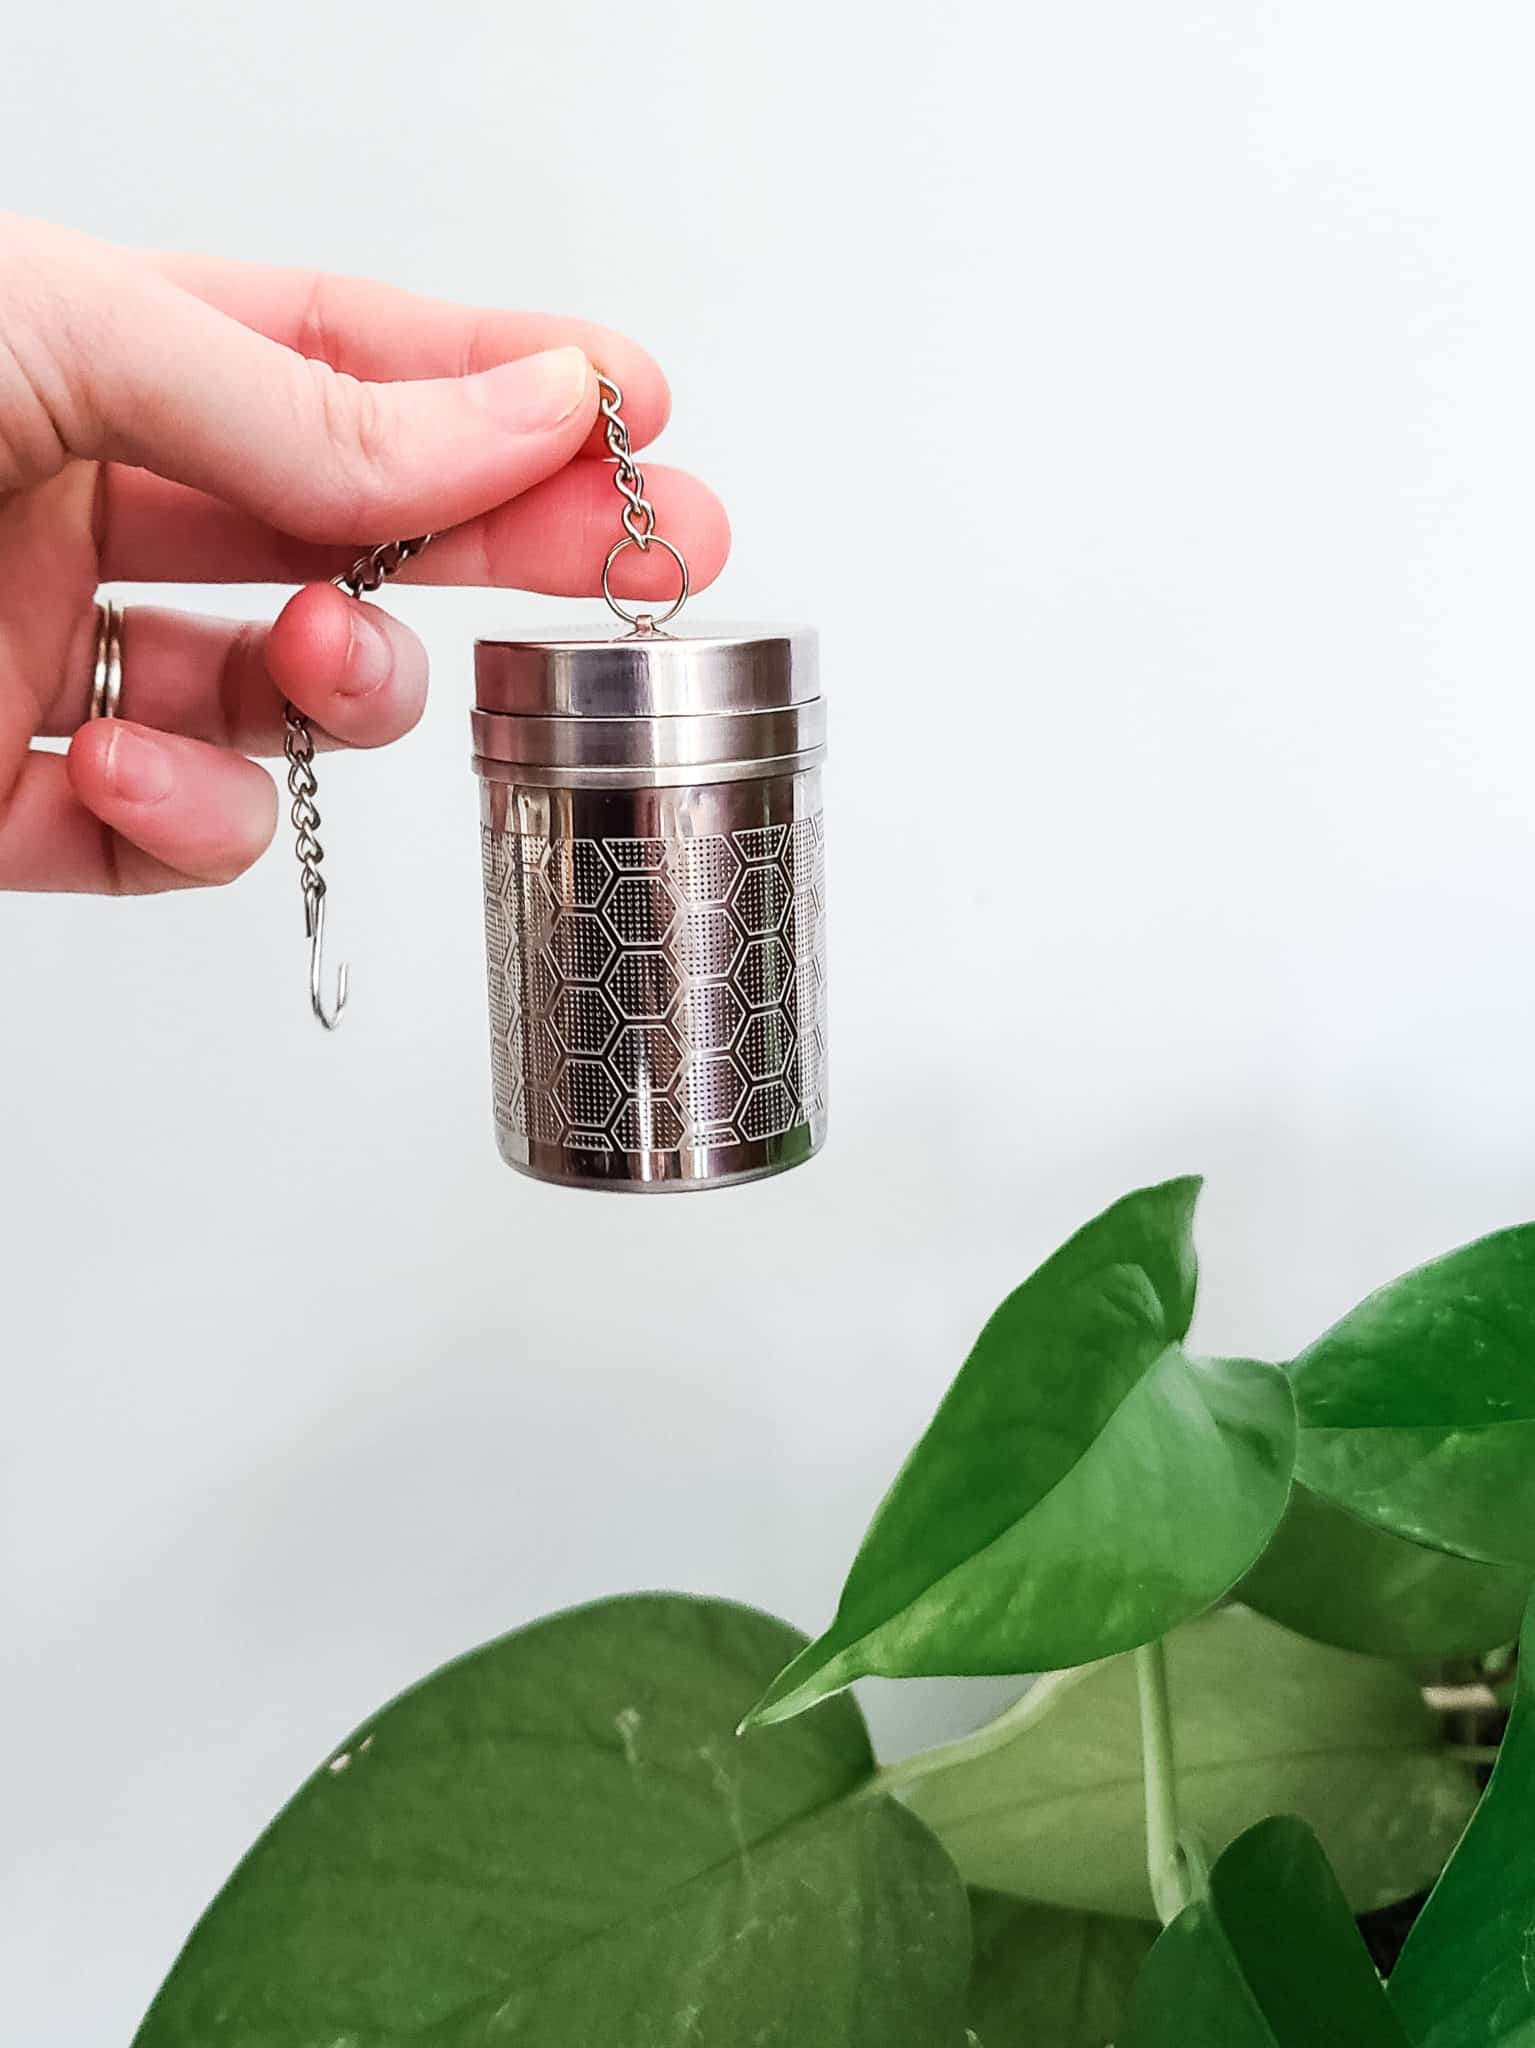 Gift for sustainability lovers - a hand dangling a steel tea infuser